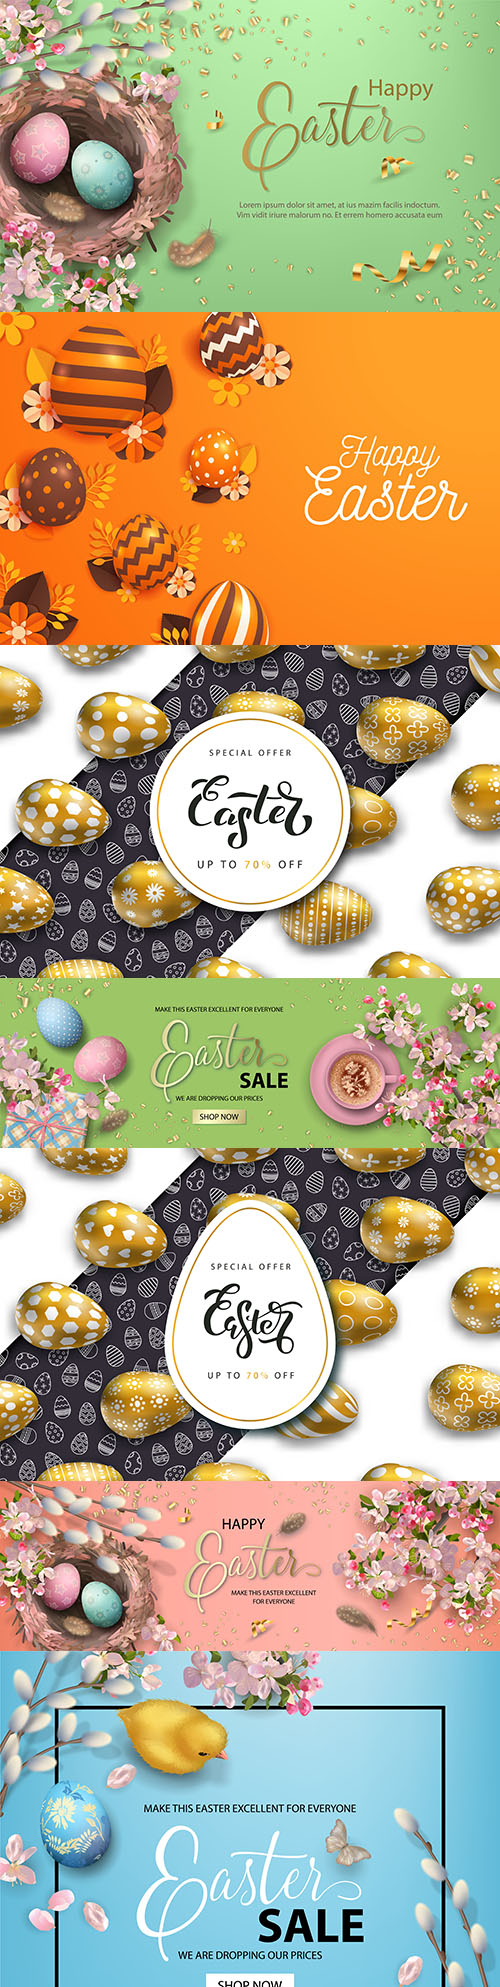 Happy Easter banners with golden eggs and flowers